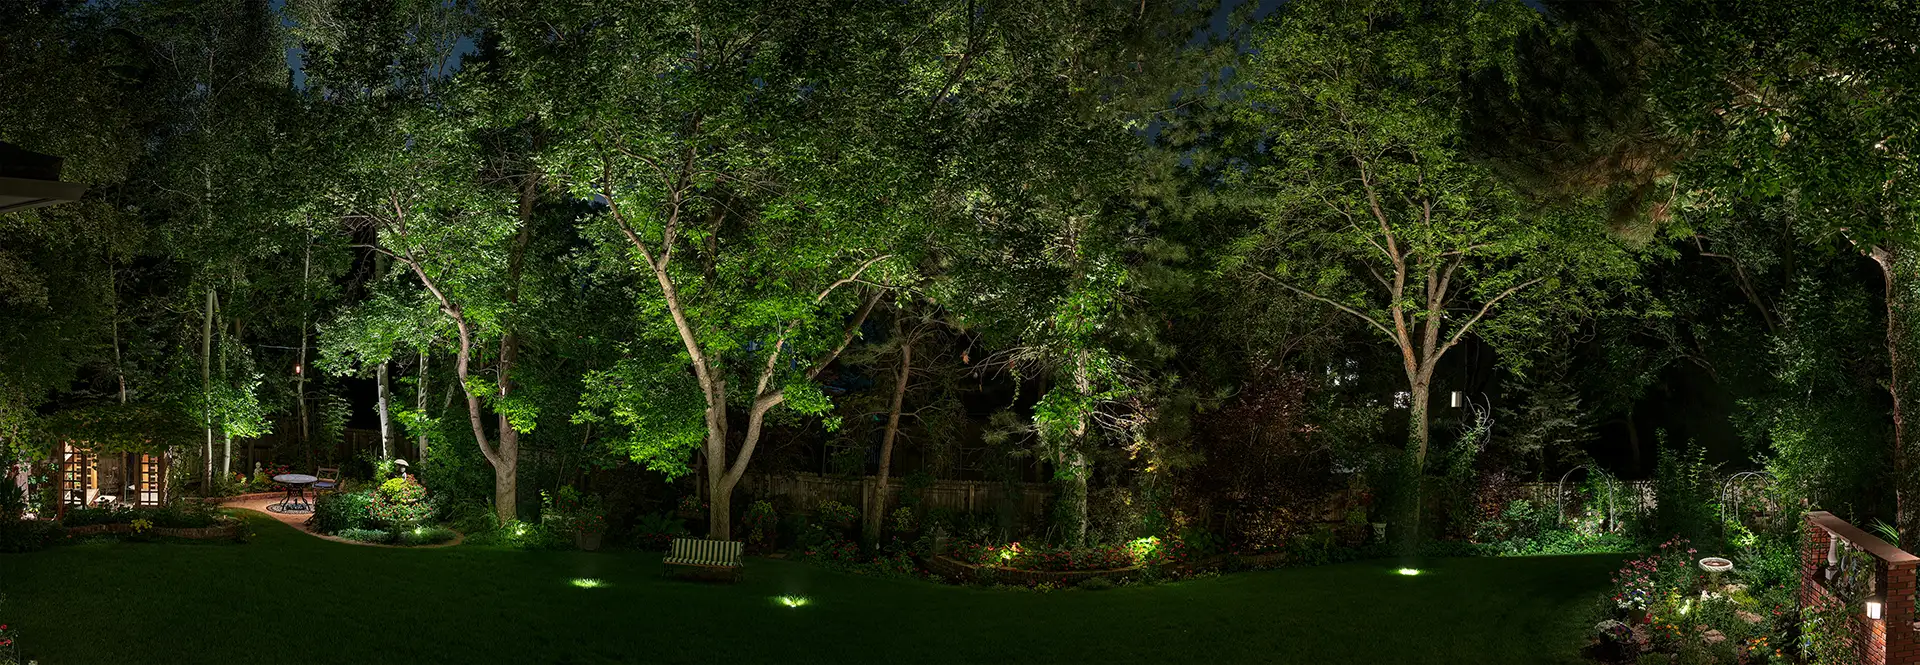 Windsong Ct image 8 landscape yard panorama Lighthouse Outdoor Lighting and Audio Denver CO